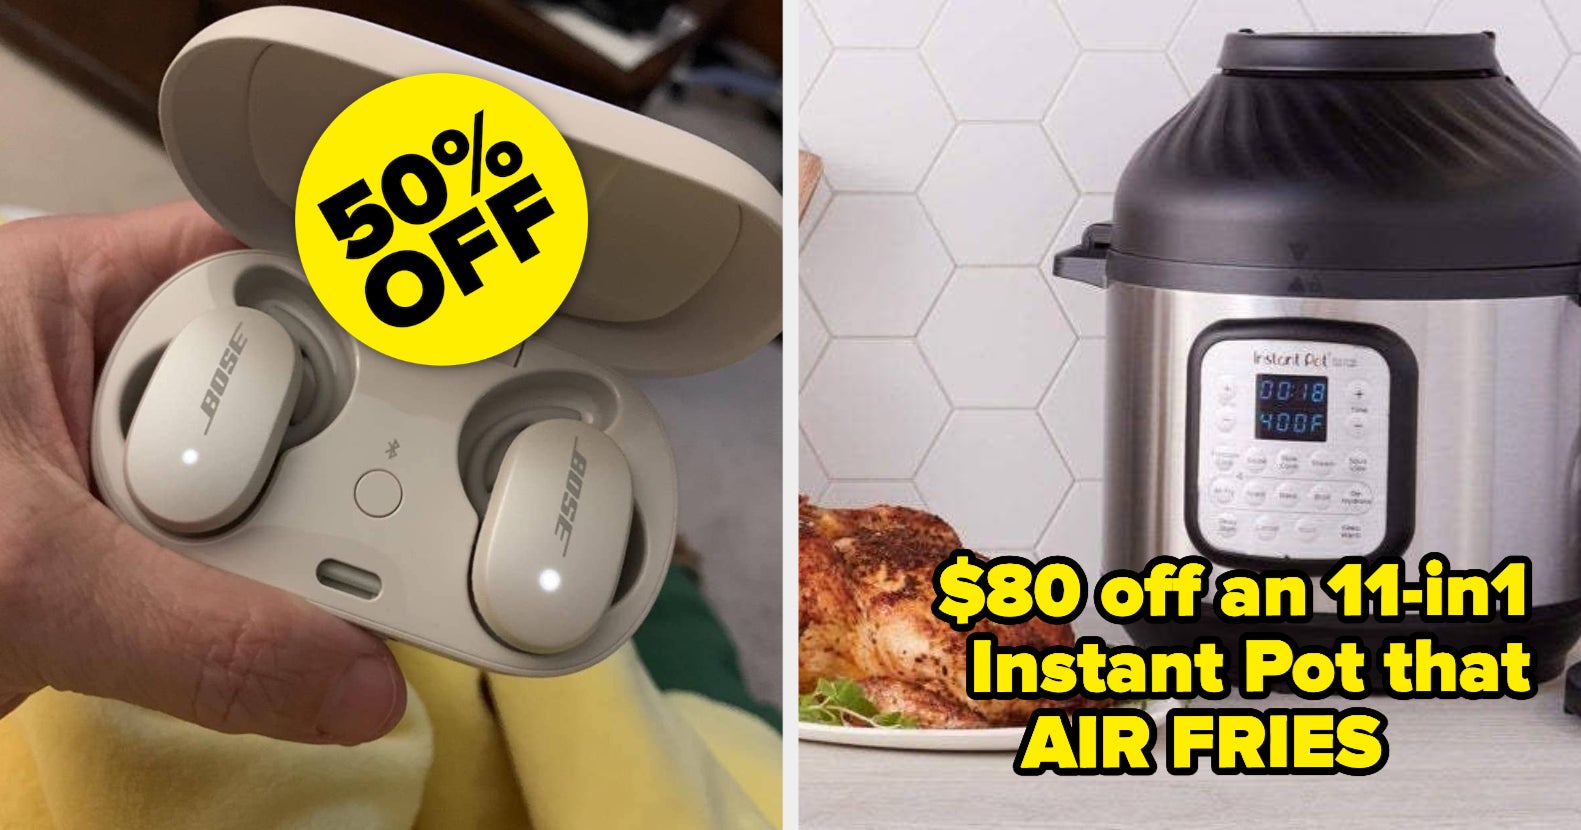 kitchen gear deals from $20: Egg cookers, mixers, NutriBullet, more  up to 47% off